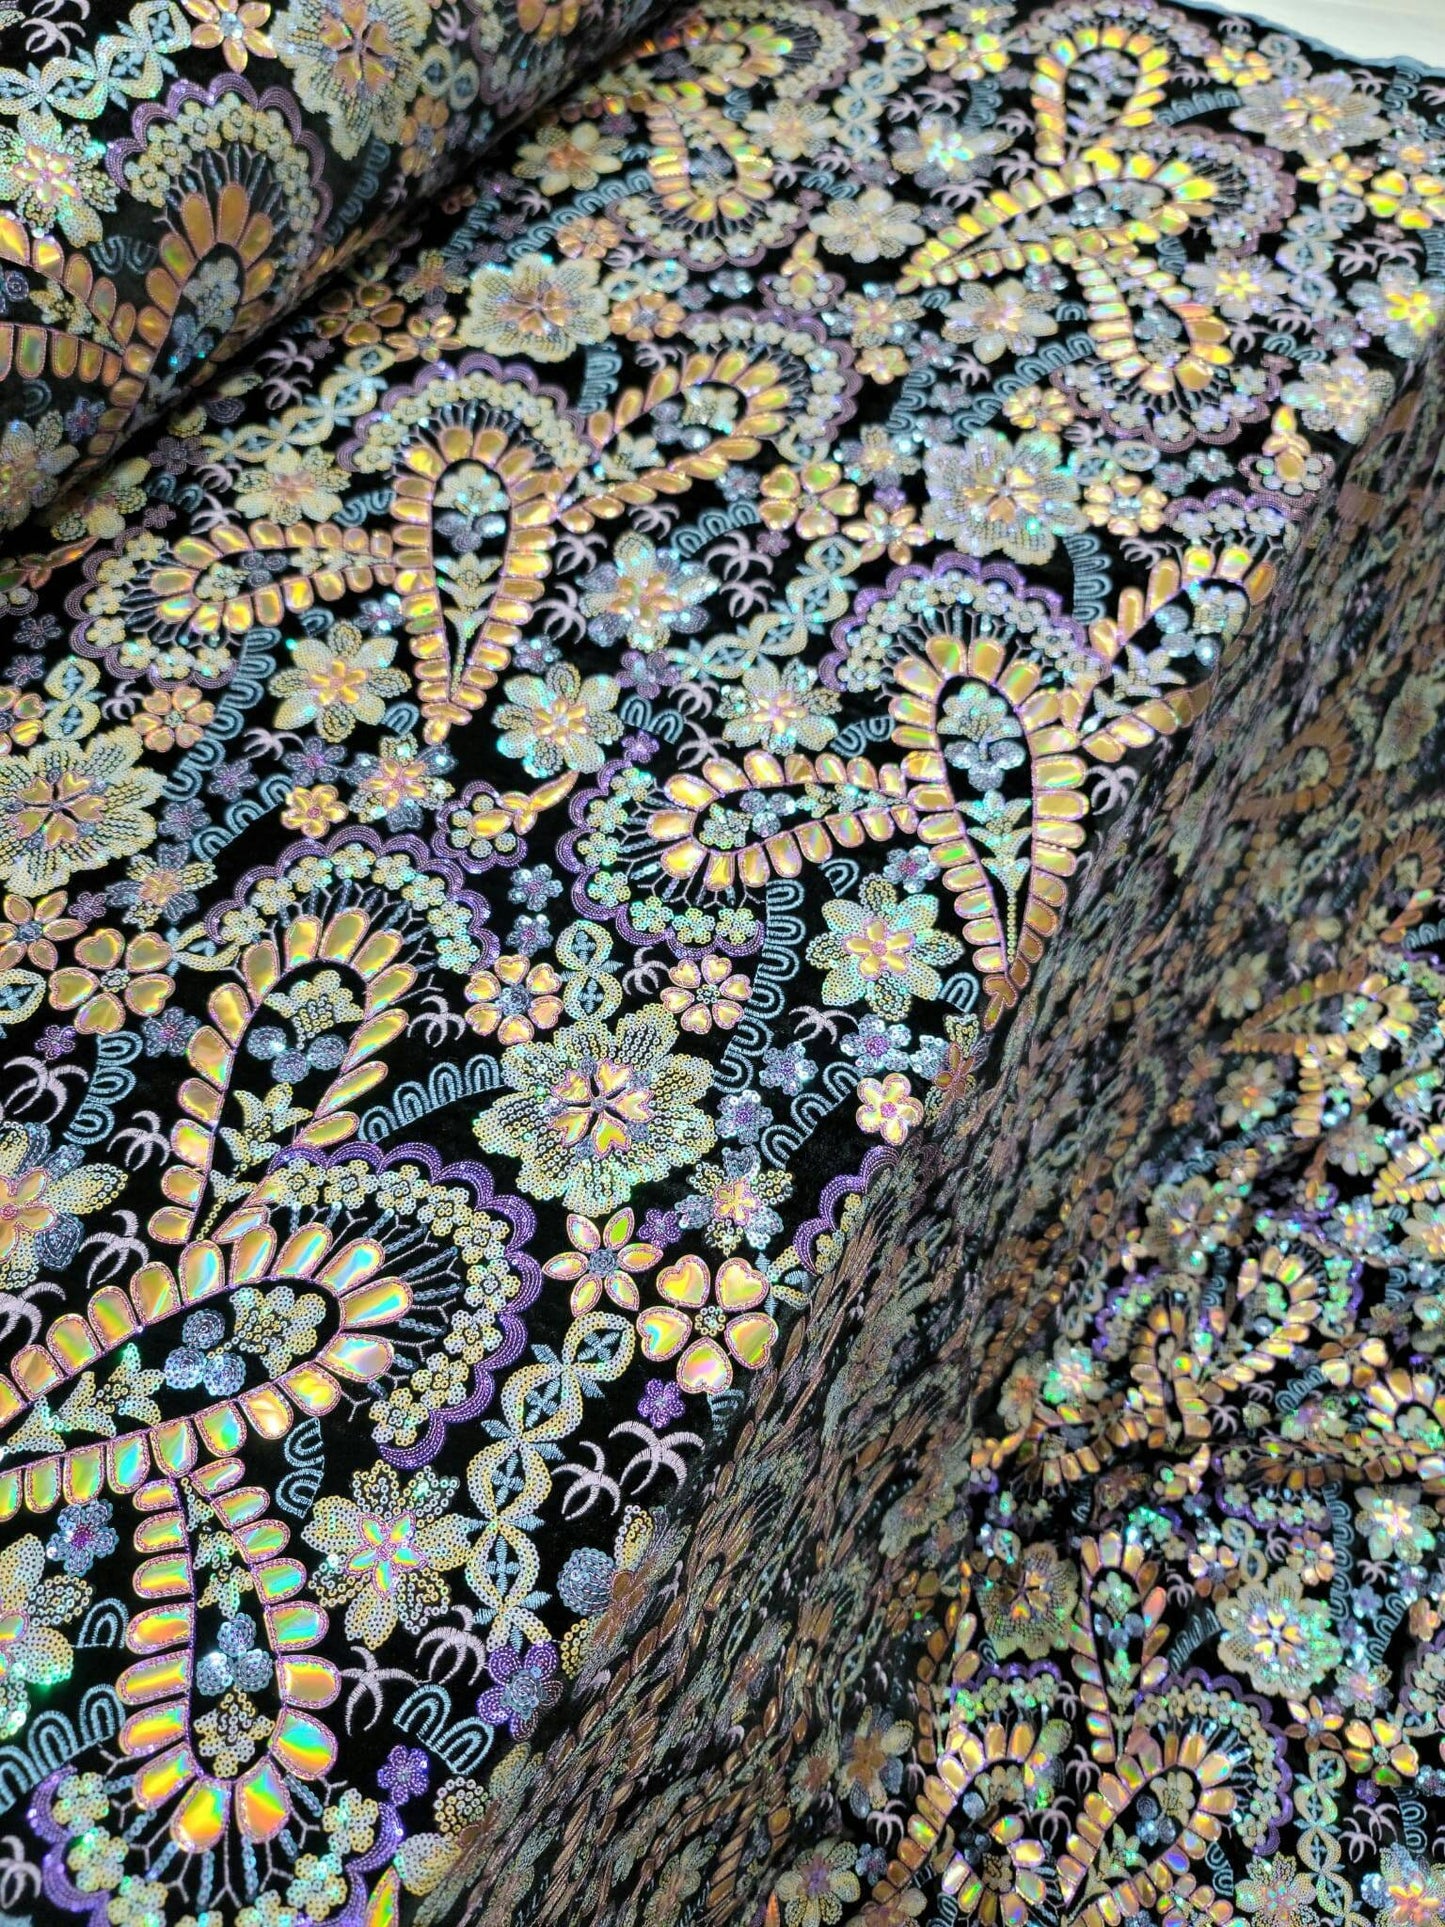 Stretch Black Velvet Multicolor Sequin Iridescent Embroidery Lace  Floral Flowers Gold Hologram Fabric Sold by the Yard Dress Bridal Gown